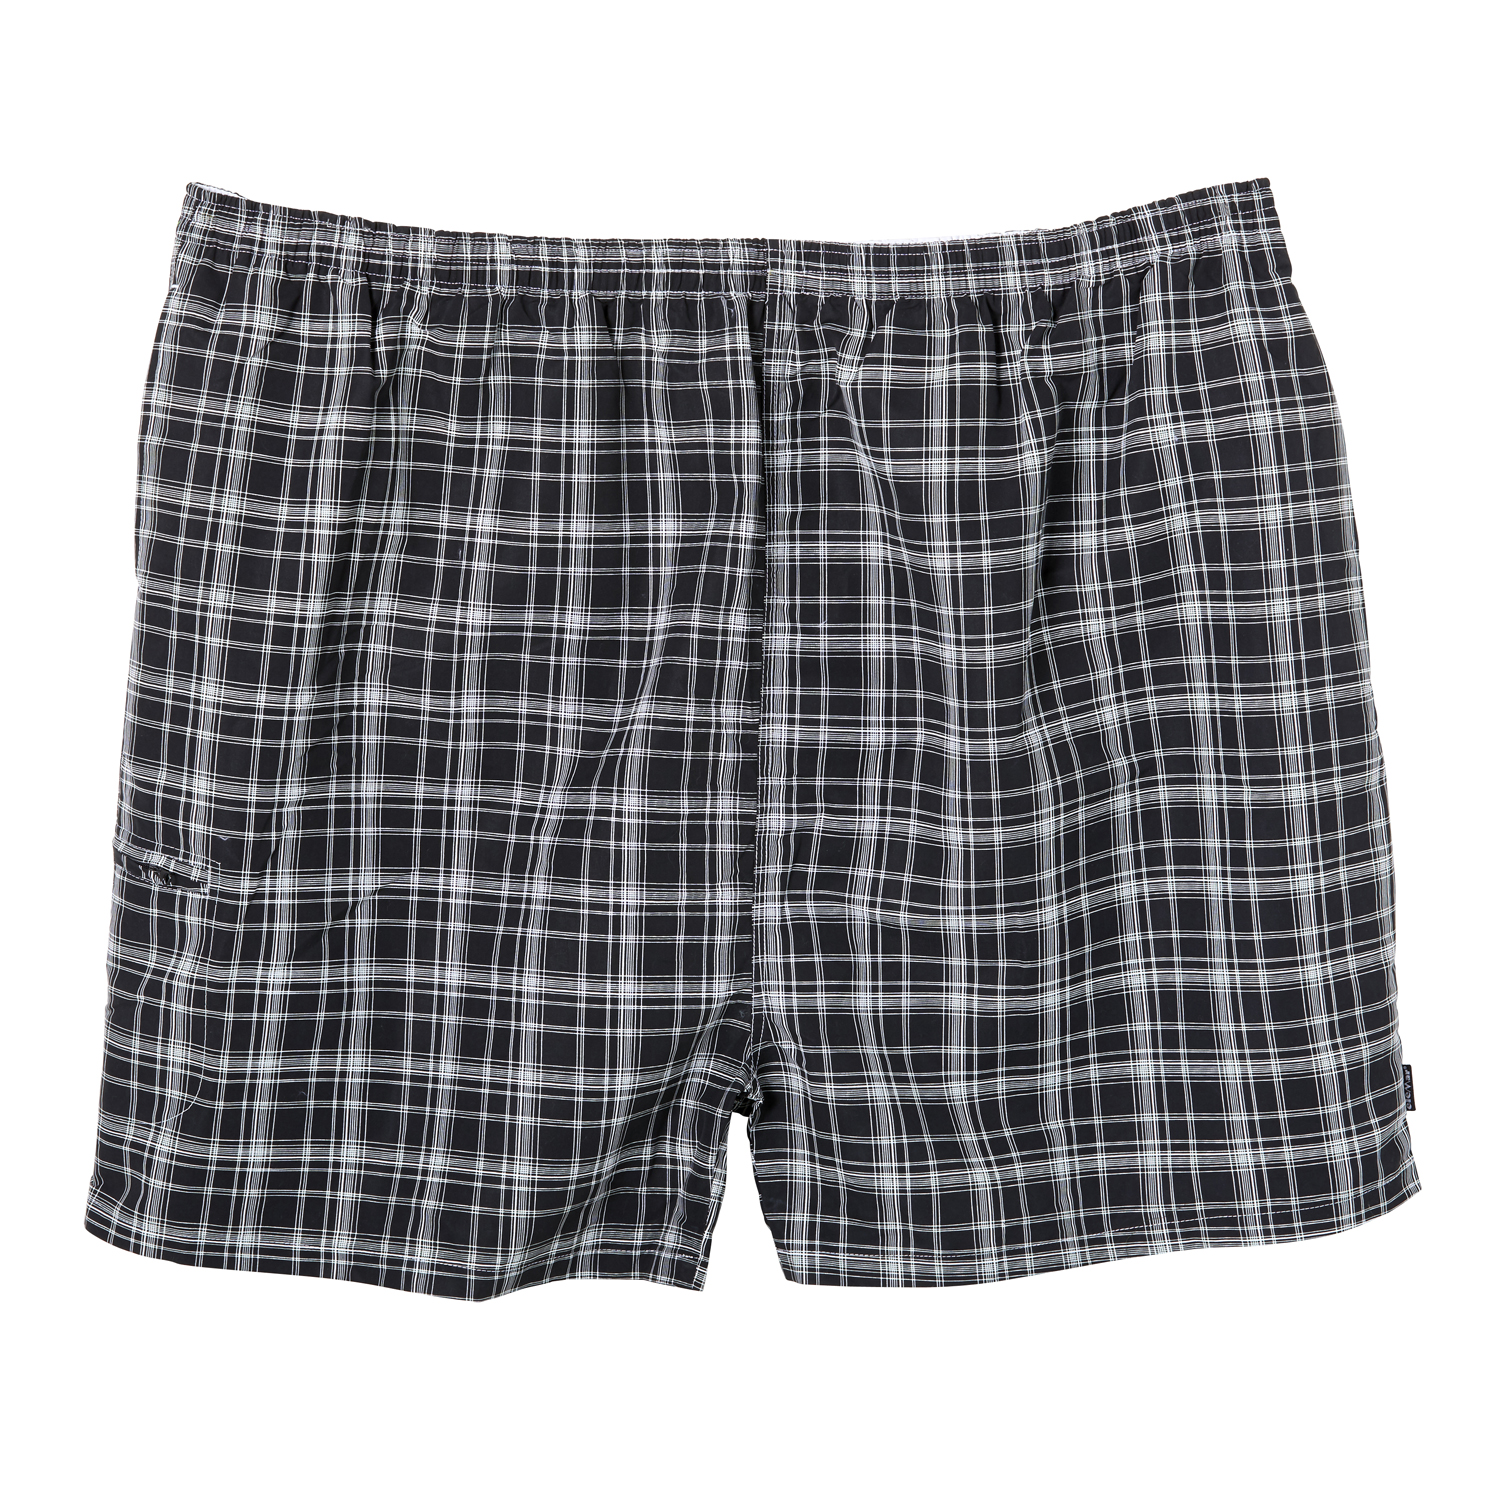 Swim shorts in black-white checkered by eleMar up to oversize 10XL